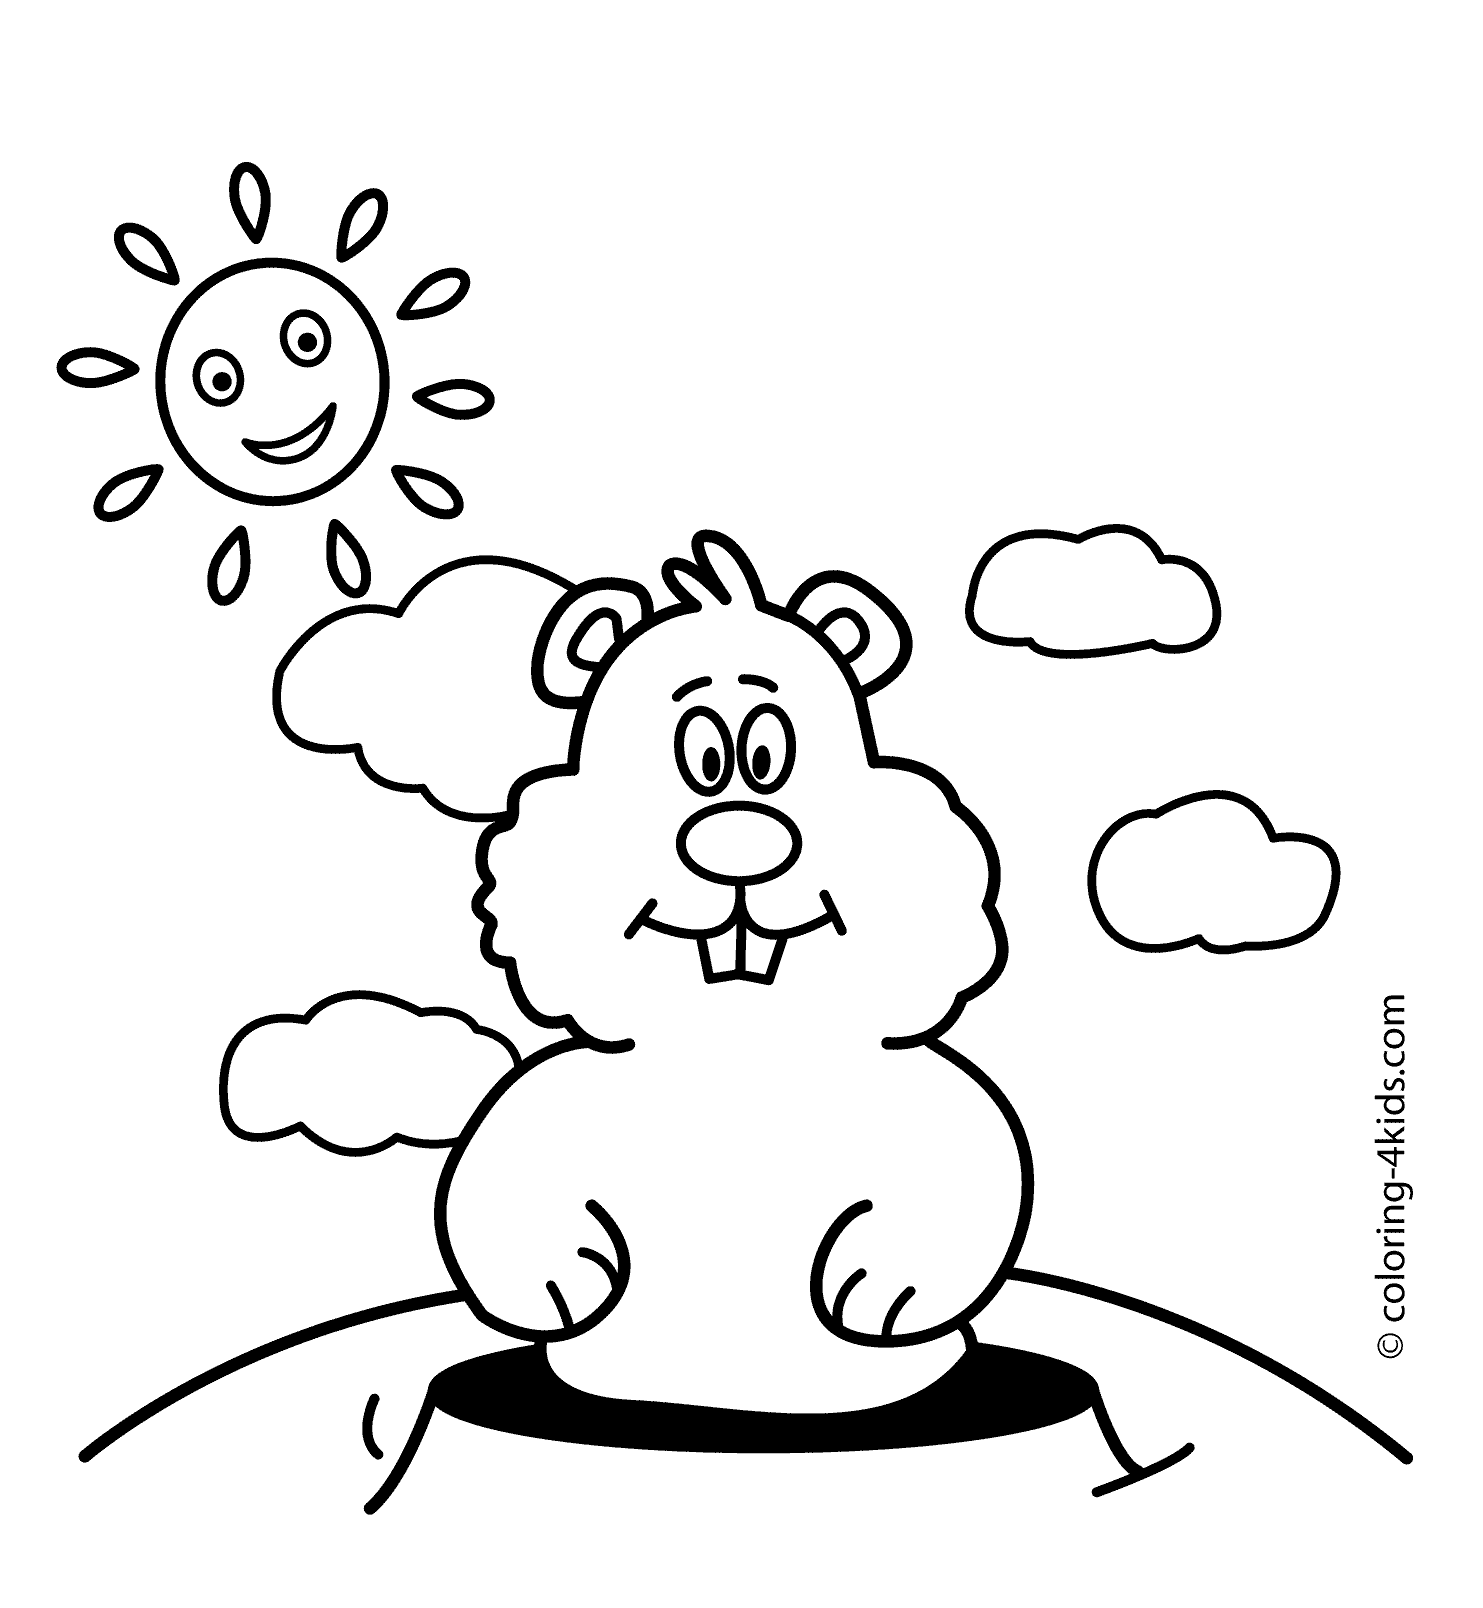 groundhog-day-coloring-page-0018-q1